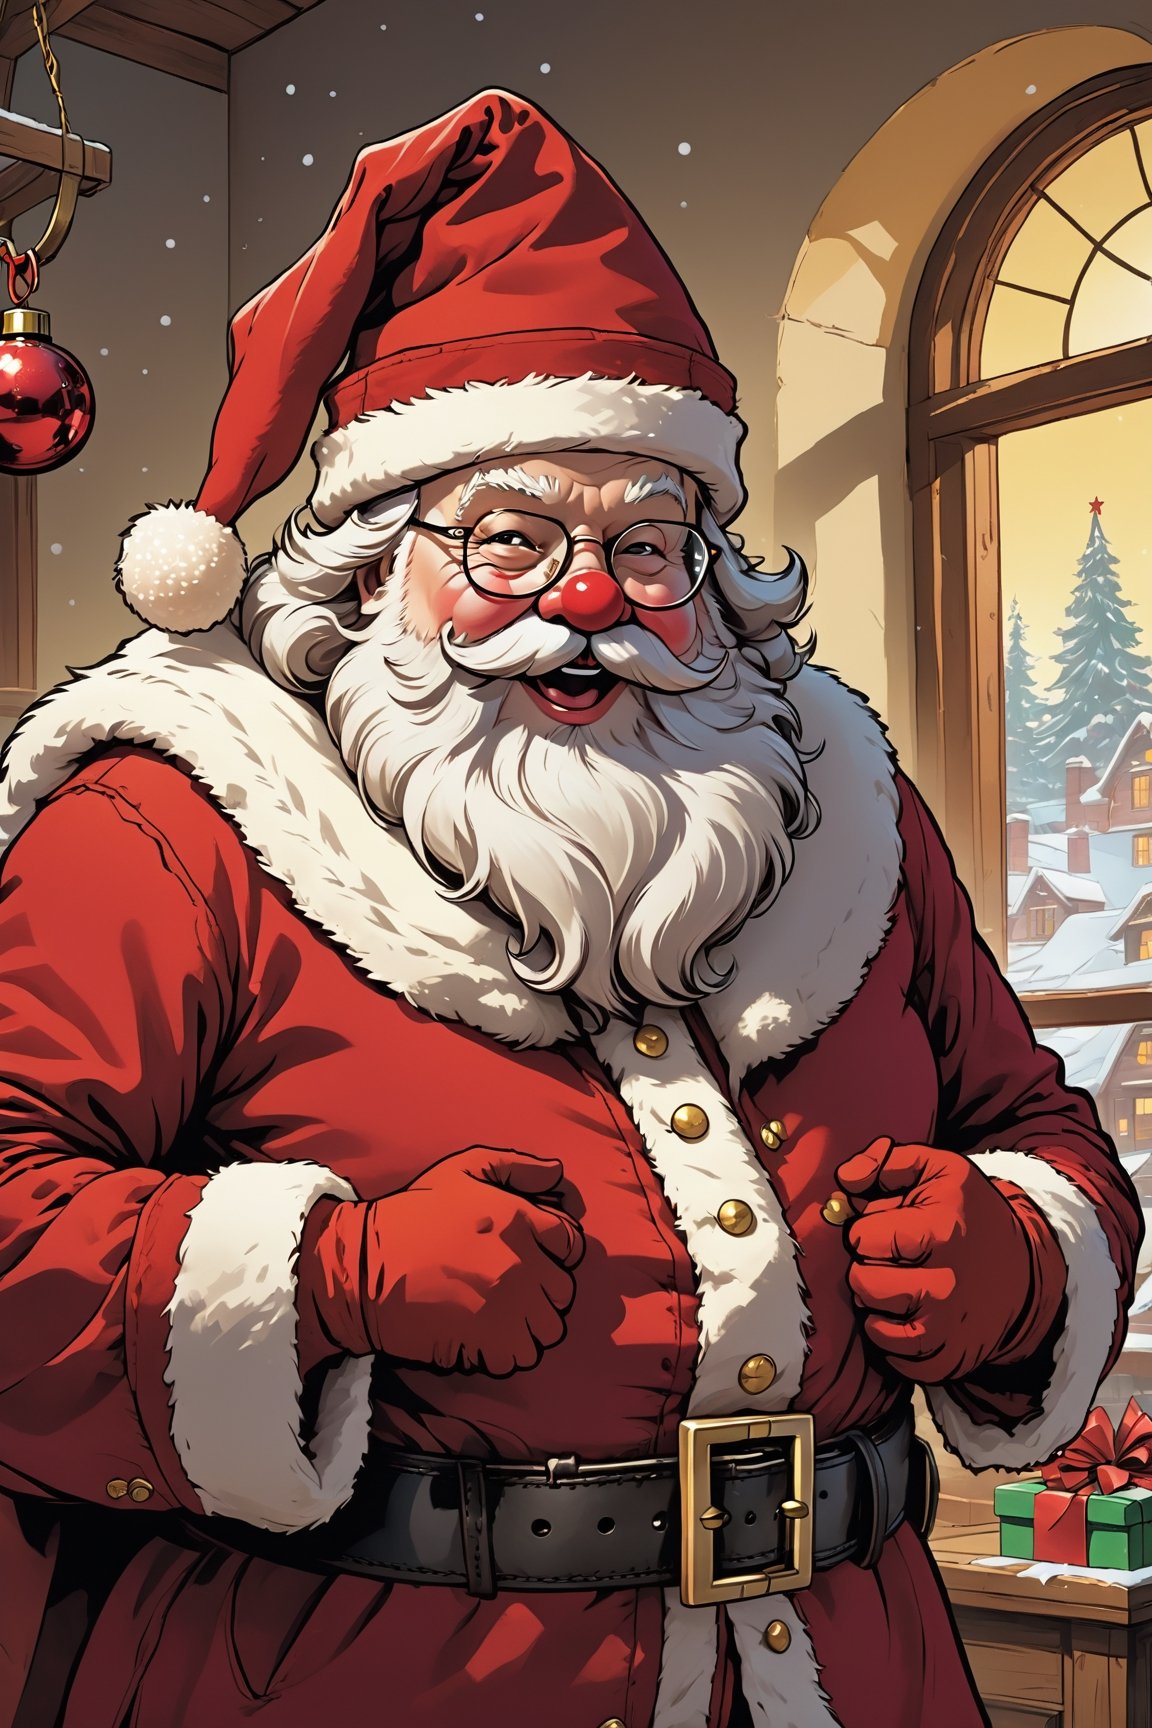 Santa Claus stands at the center of the frame, exuding the timeless charm of the holiday season. His iconic red suit is adorned with fluffy white fur trim, perfectly contrasting the bold shade of crimson. The coat, fastened with a thick black belt and a polished golden buckle, cinches around his rotund belly. The suit's cuffs peek out from underneath a pair of immaculate, snow-white gloves that he wears with a jolly demeanor.

Santa's robust, rosy cheeks are framed by a well-groomed, snowy white beard that cascades down to his chest. His friendly, twinkling eyes, framed by round spectacles, radiate warmth and merriment. A cherry-red nose adds a playful touch to his cheerful countenance.

Upon Santa's head rests a plush, fur-trimmed hat, matching the ensemble, with a fluffy white pom-pom hanging delicately at the tip. The hat sits jauntily atop his head, completing the quintessential look of the beloved gift-giver.

In one hand, Santa holds a carefully wrapped present, adorned with festive paper and a perfectly tied bow. The other hand, raised in a gesture of merriment, holds a sleigh bell that chimes with the joyful sound of the holiday spirit.

This detailed image prompt of Santa Claus captures the classic and heartwarming essence of the beloved character, ready to bring joy and gifts to all.

high details, ultra HD, 8k, high resolution, 